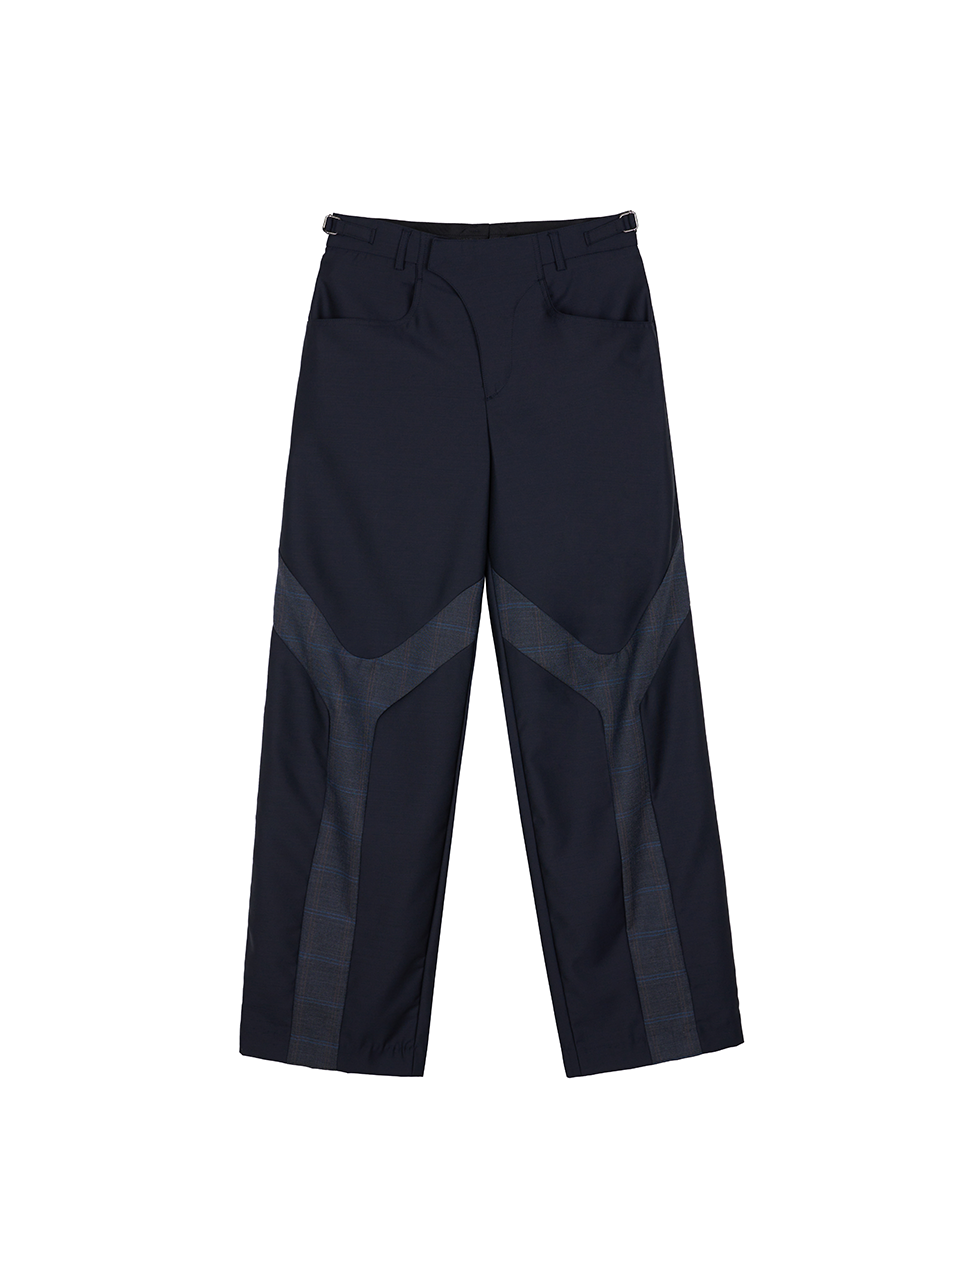 HELIX CLOTHING - 3 DIRECTION TROUSERS TYPE C (DEEP NAVY)